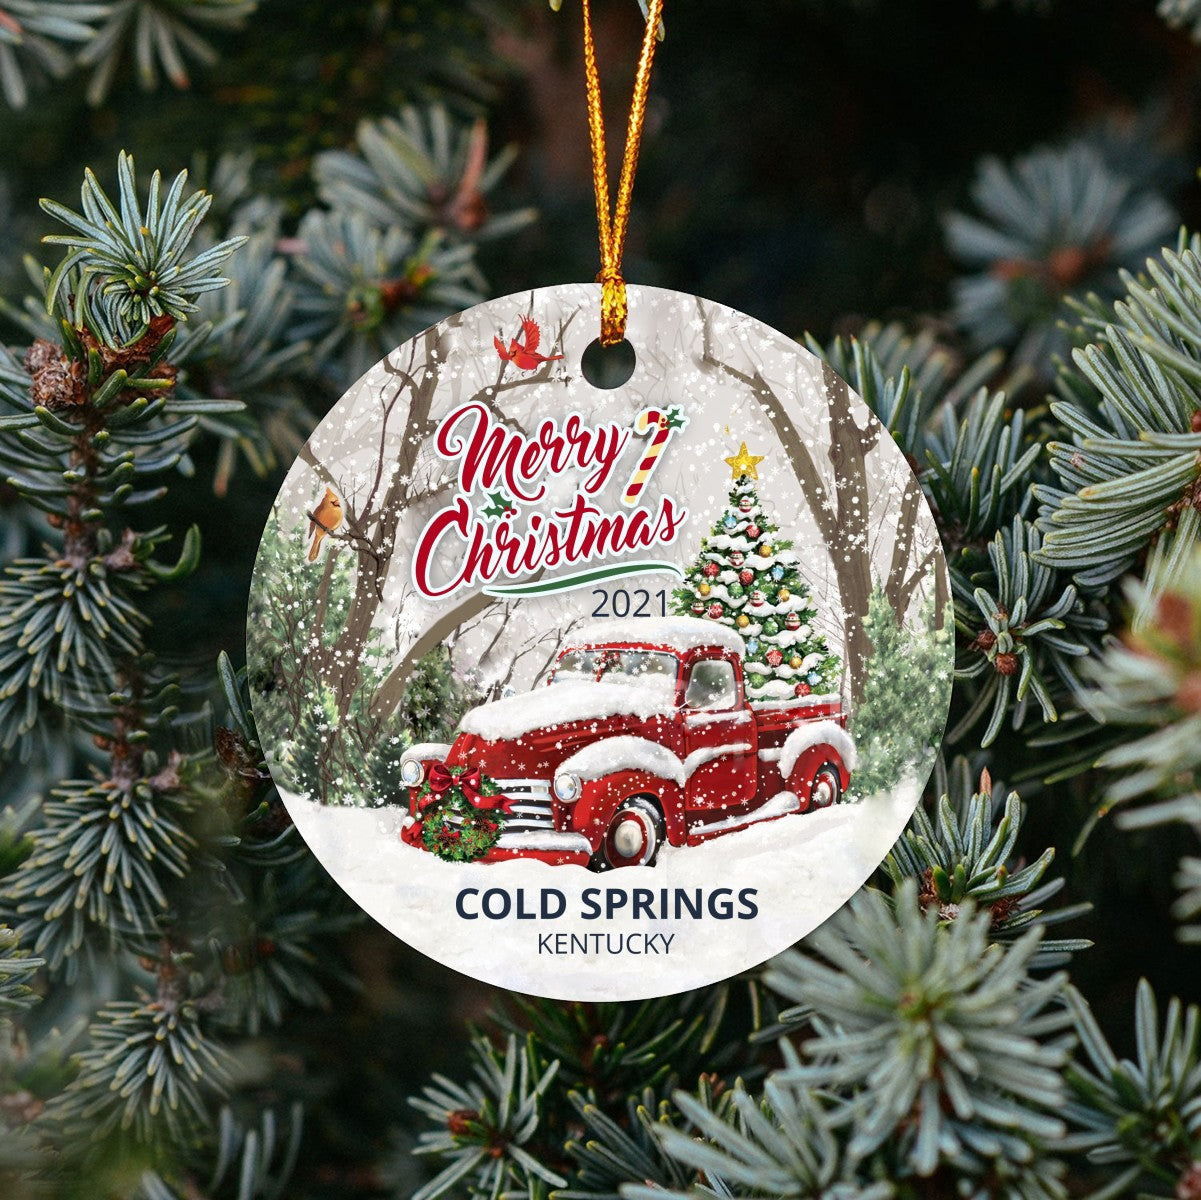 Christmas Tree Ornaments Cold Springs - Ornament With Name City, State Cold Springs Kentucky KY Ornament - Red Truck Xmas Ornaments 3'' Plastic Gift For Family, Friend And Housewarming